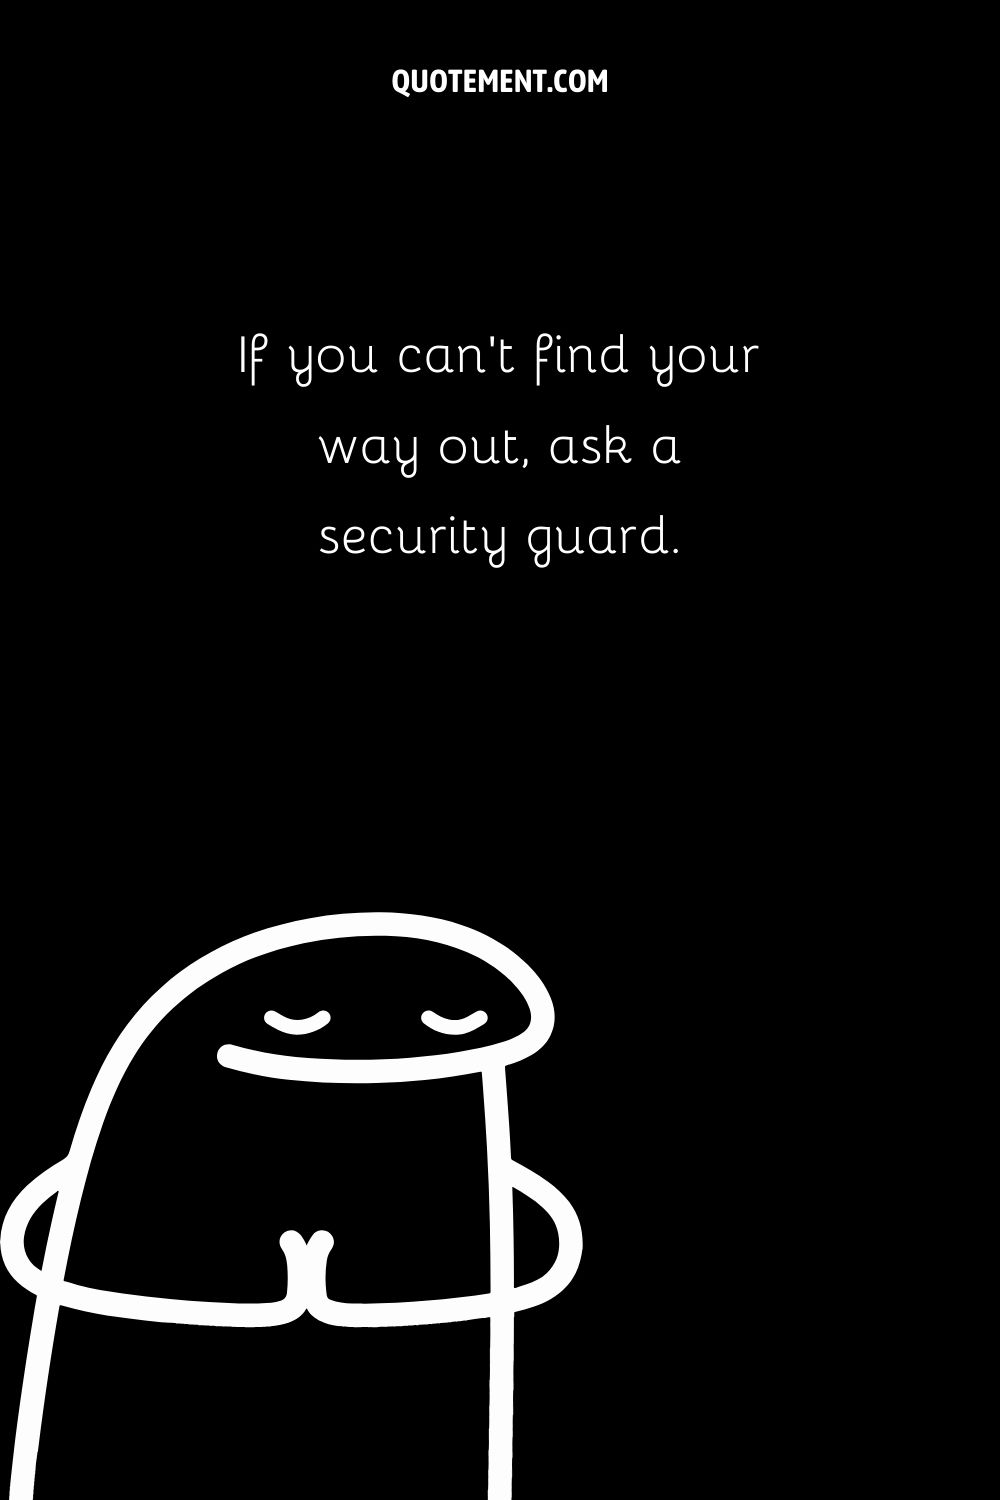 If you can’t find your way out, ask a security guard.